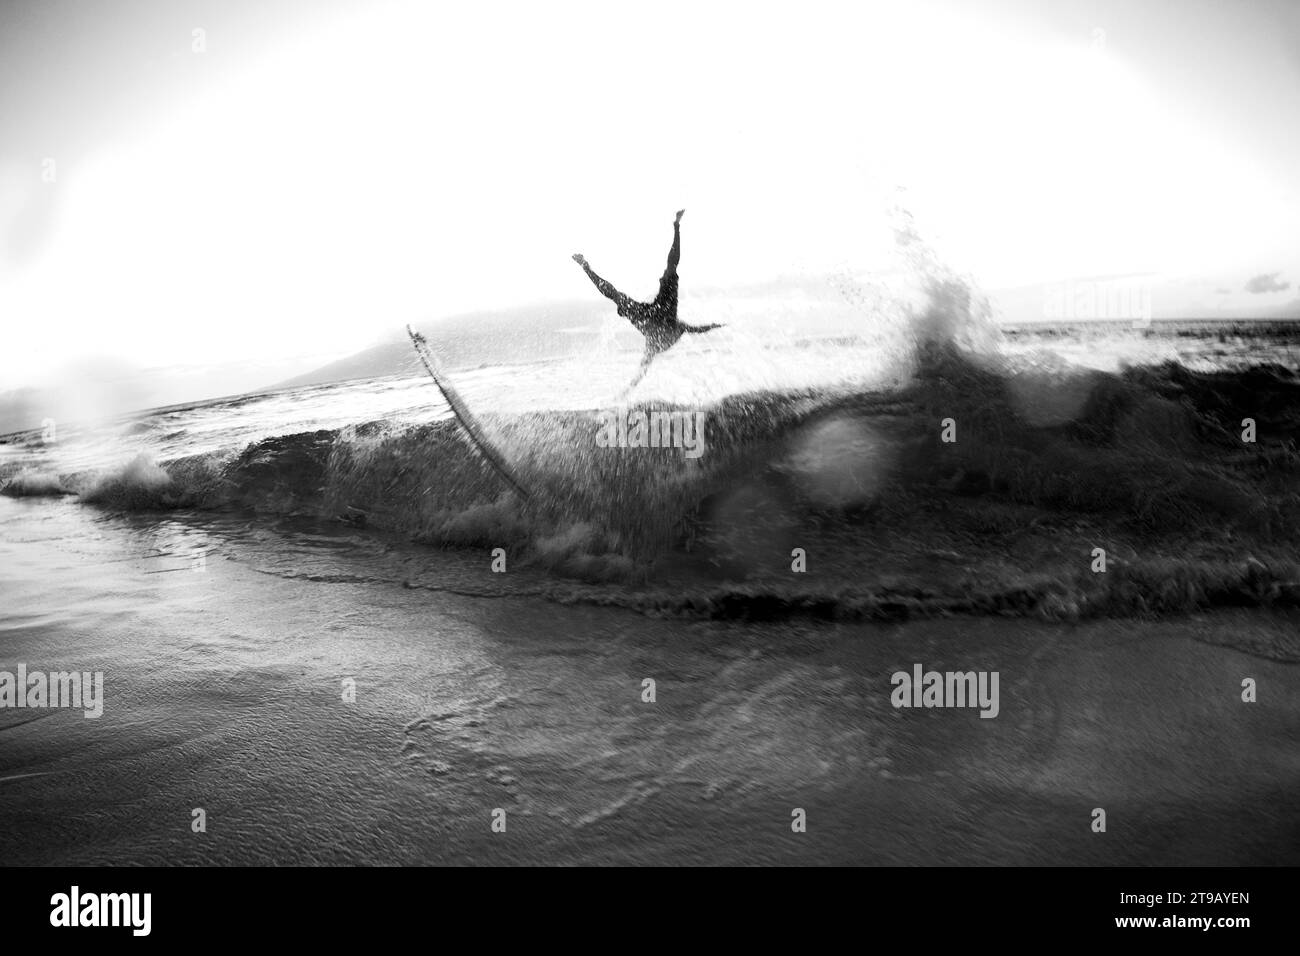 Black and white image of a skimboarder getting wiped out by a wave. Stock Photo